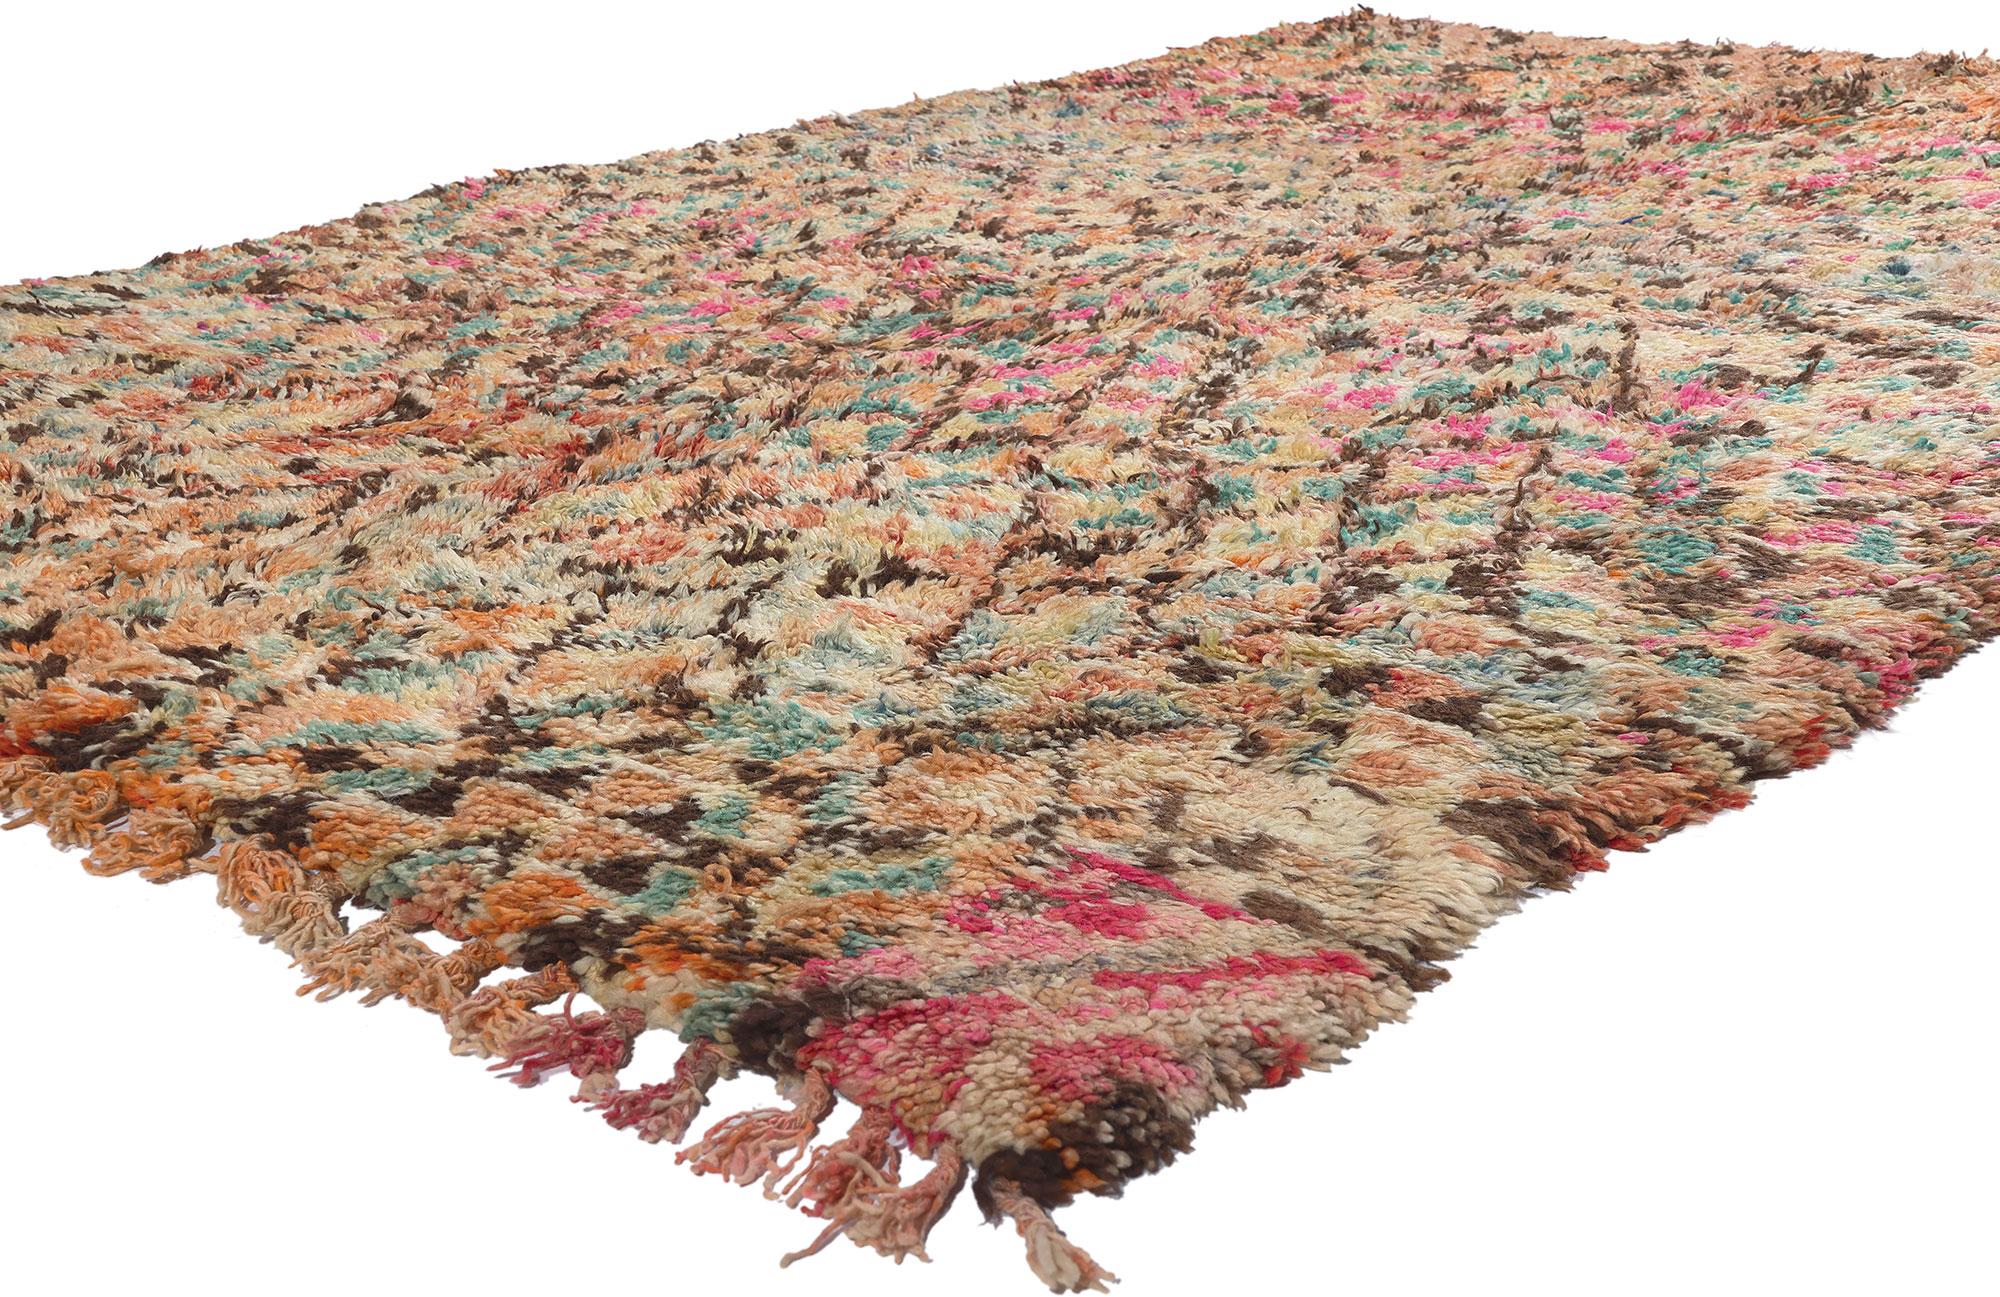 21218 Vintage Beni MGuild Moroccan Rug, 05'08 x 08'06. Nestled within the enchanting embrace of Morocco's Atlas Mountains, the skilled hands of Berber women from the Ait M'Guild tribe weave captivating tales through the intricate artistry of Beni